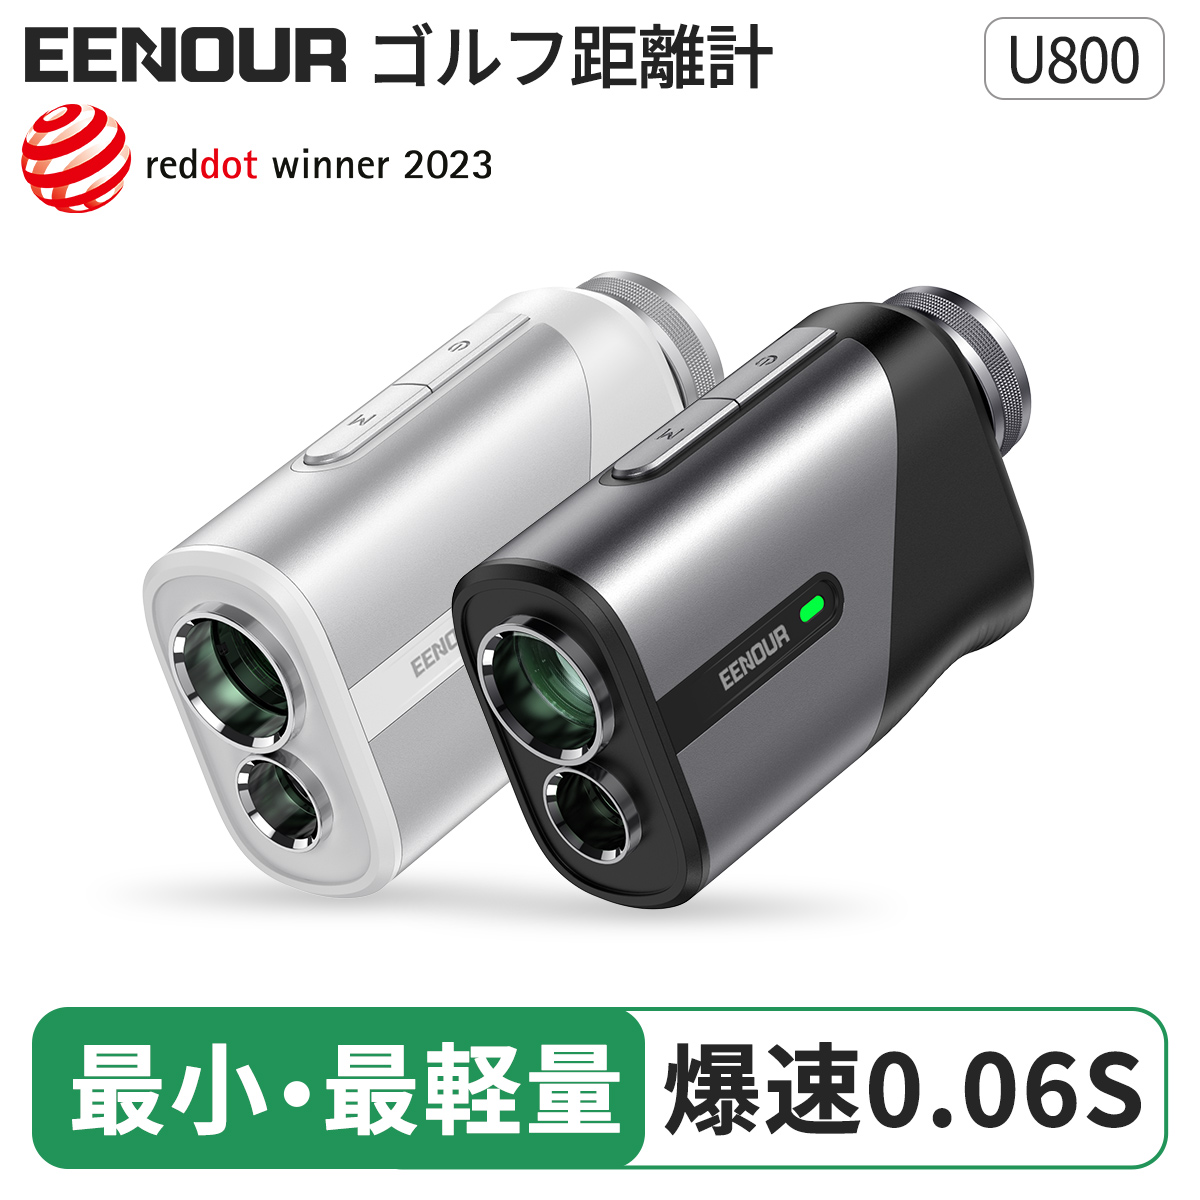 ||BB the lowest price sale last day!||[TV. introduction / Yahoo! Rakuten AM1 rank ] Golf range finder laser rangefinder Mini EENOUR U800 fastest 0.06 second pcs 6.5 times seeing at distance many layer coating Mother's Day 